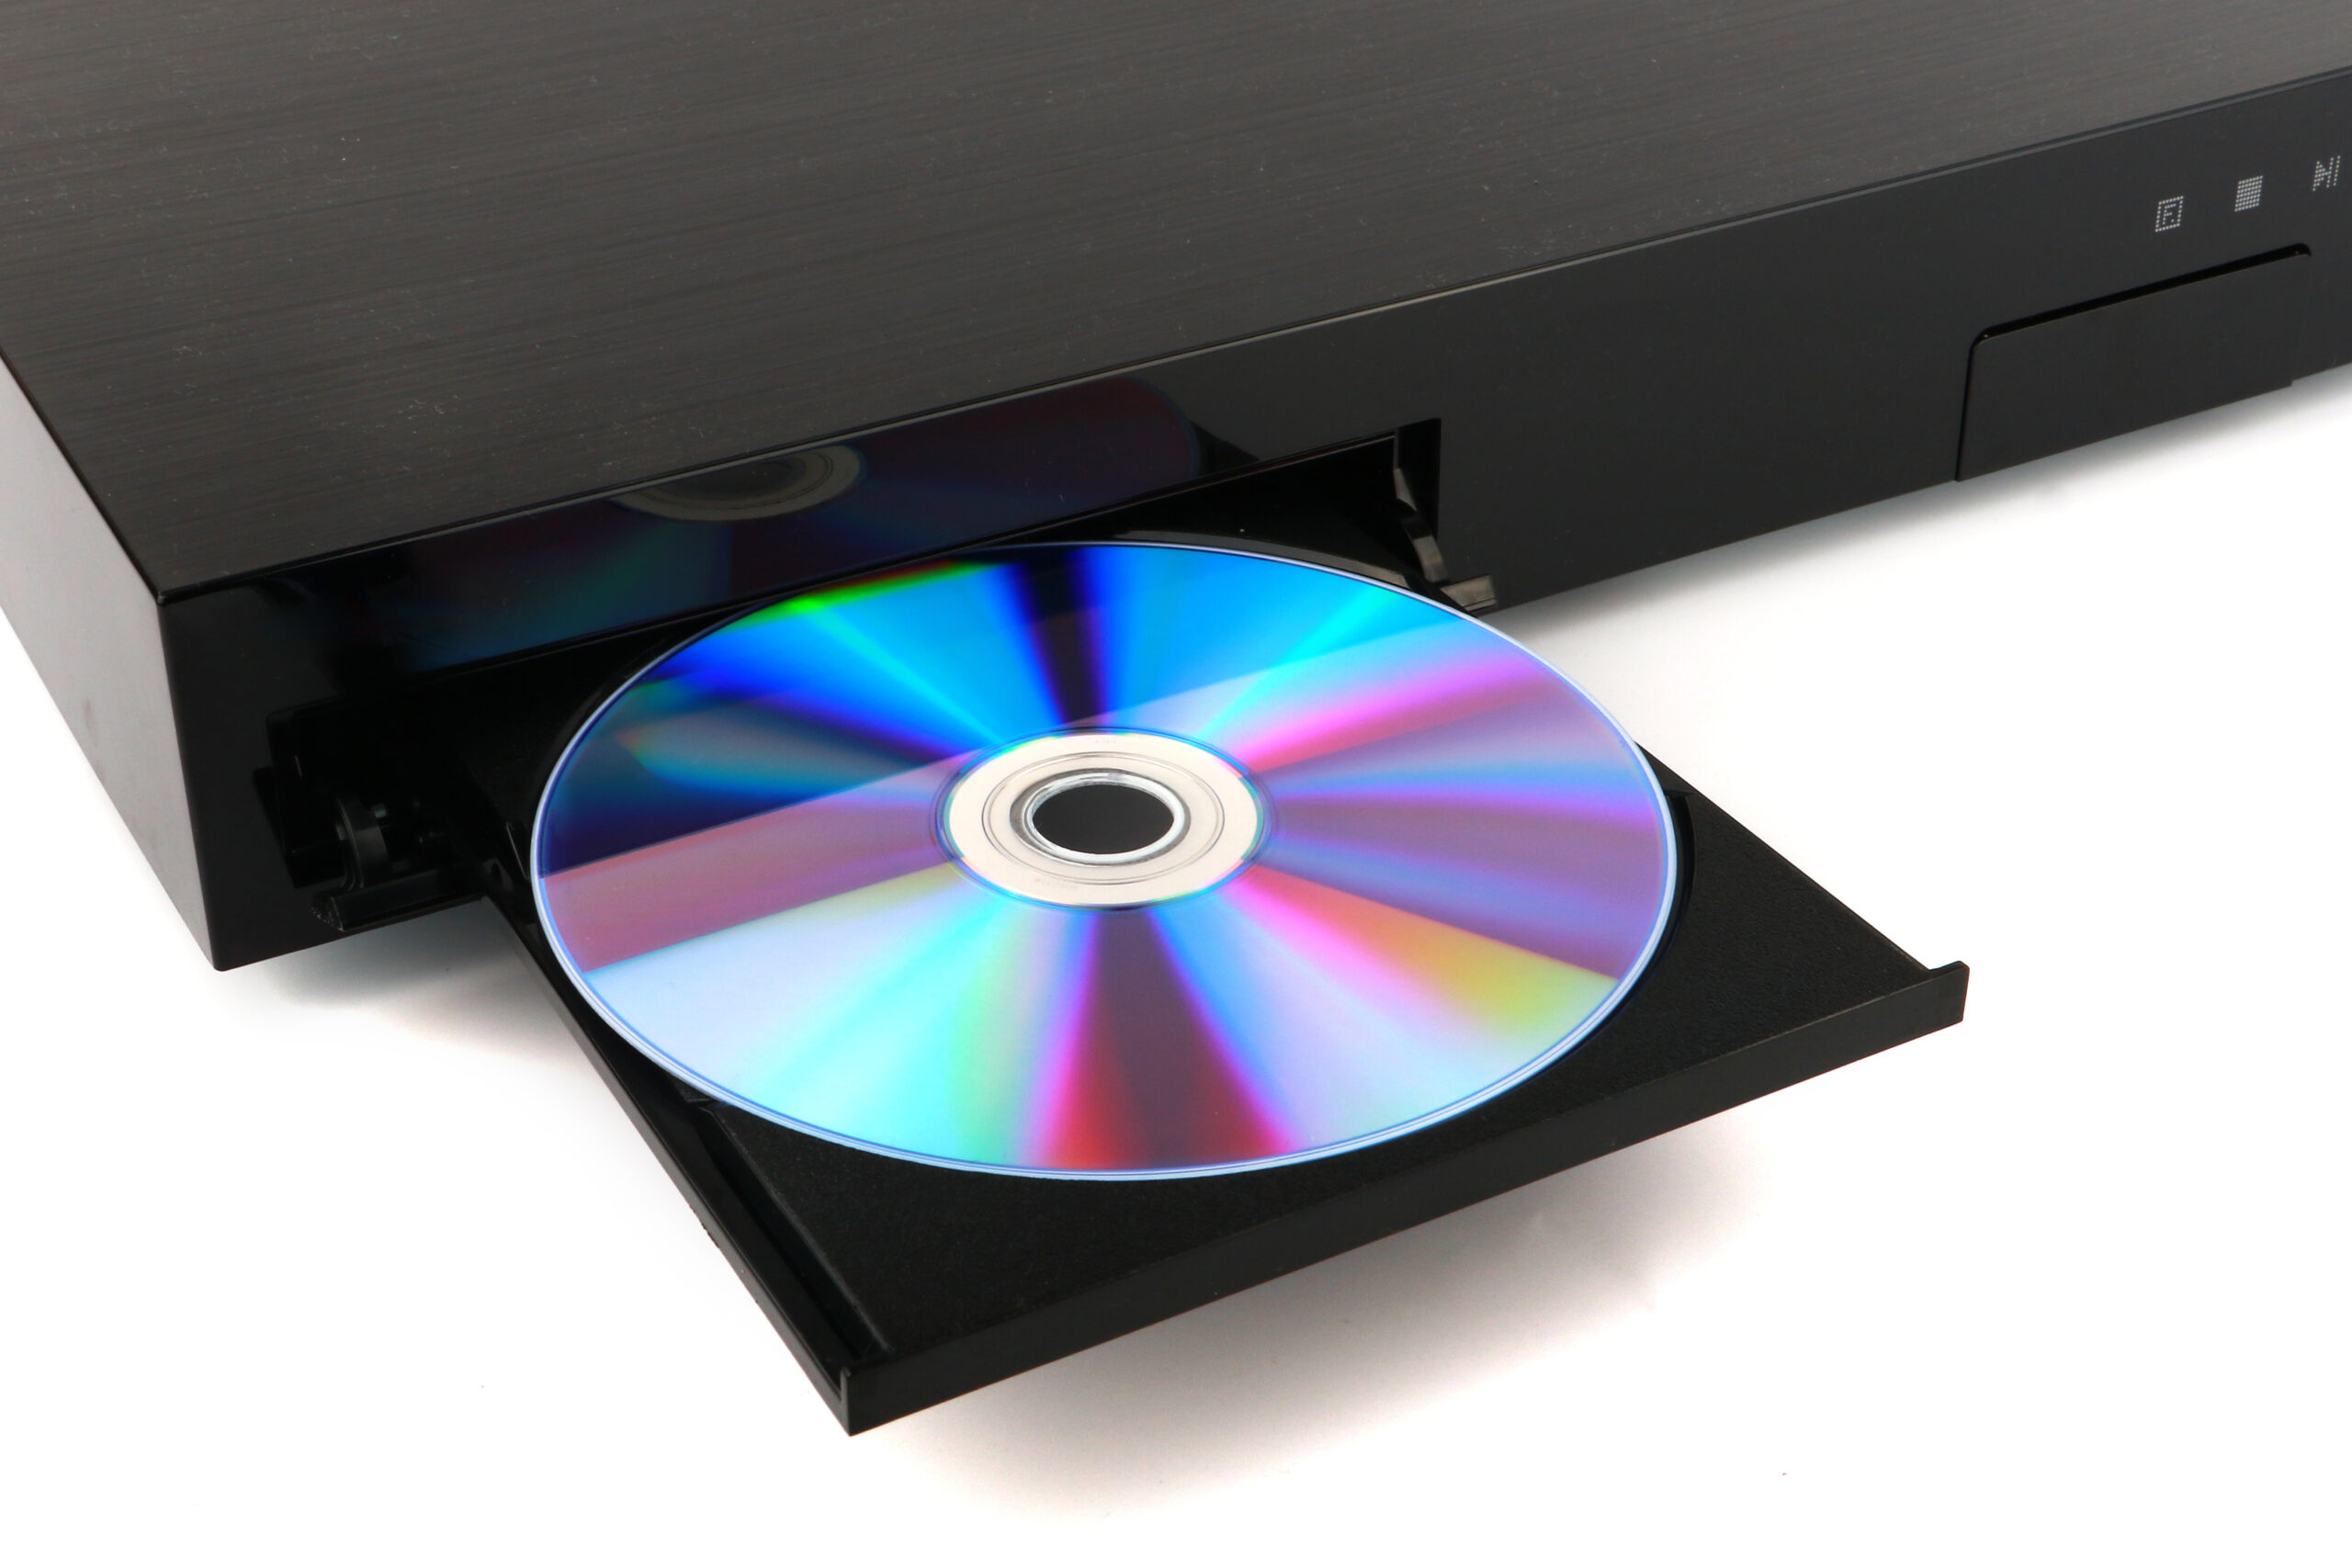 How to dispose of or recycle CDs, DVDs, and VHS tapes - Default V2